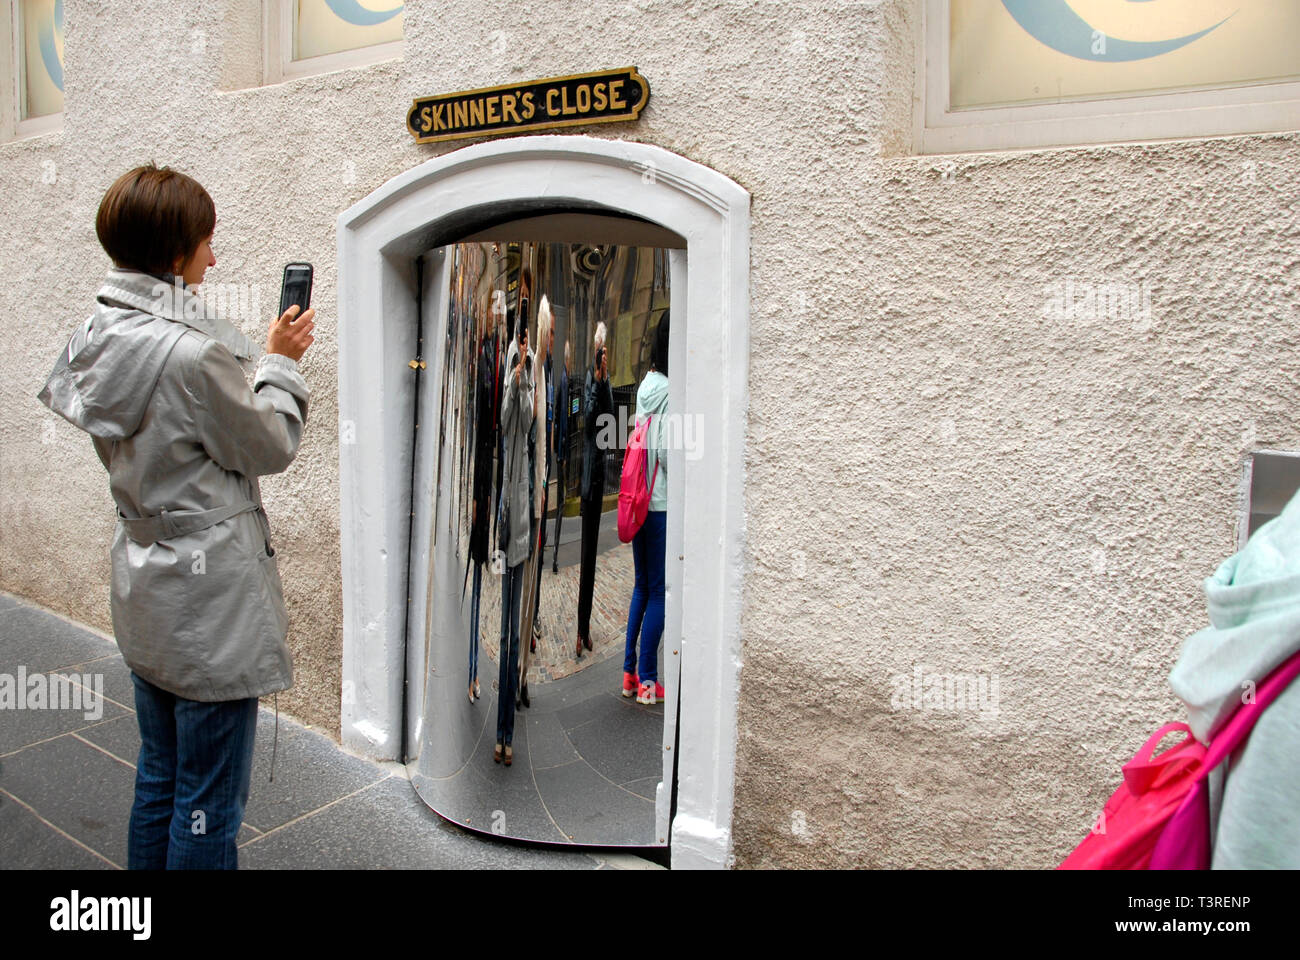 Young lady taking photograph of herself in distorting mirror, Edinburgh, Scotland Stock Photo